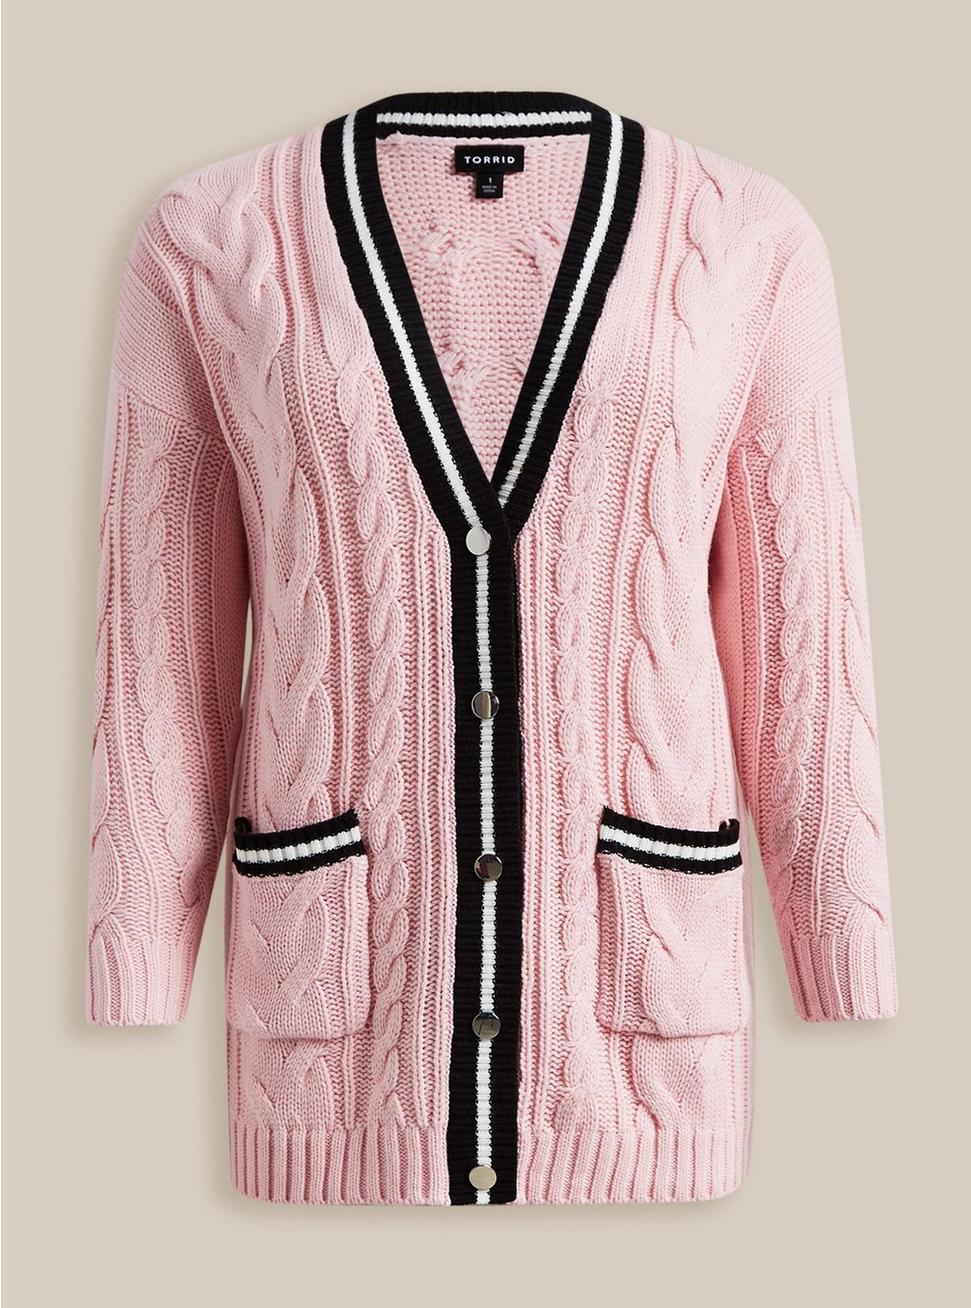 Chunky Cable Boyfriend Cardigan V-Neck Sweater, PINK, hi-res